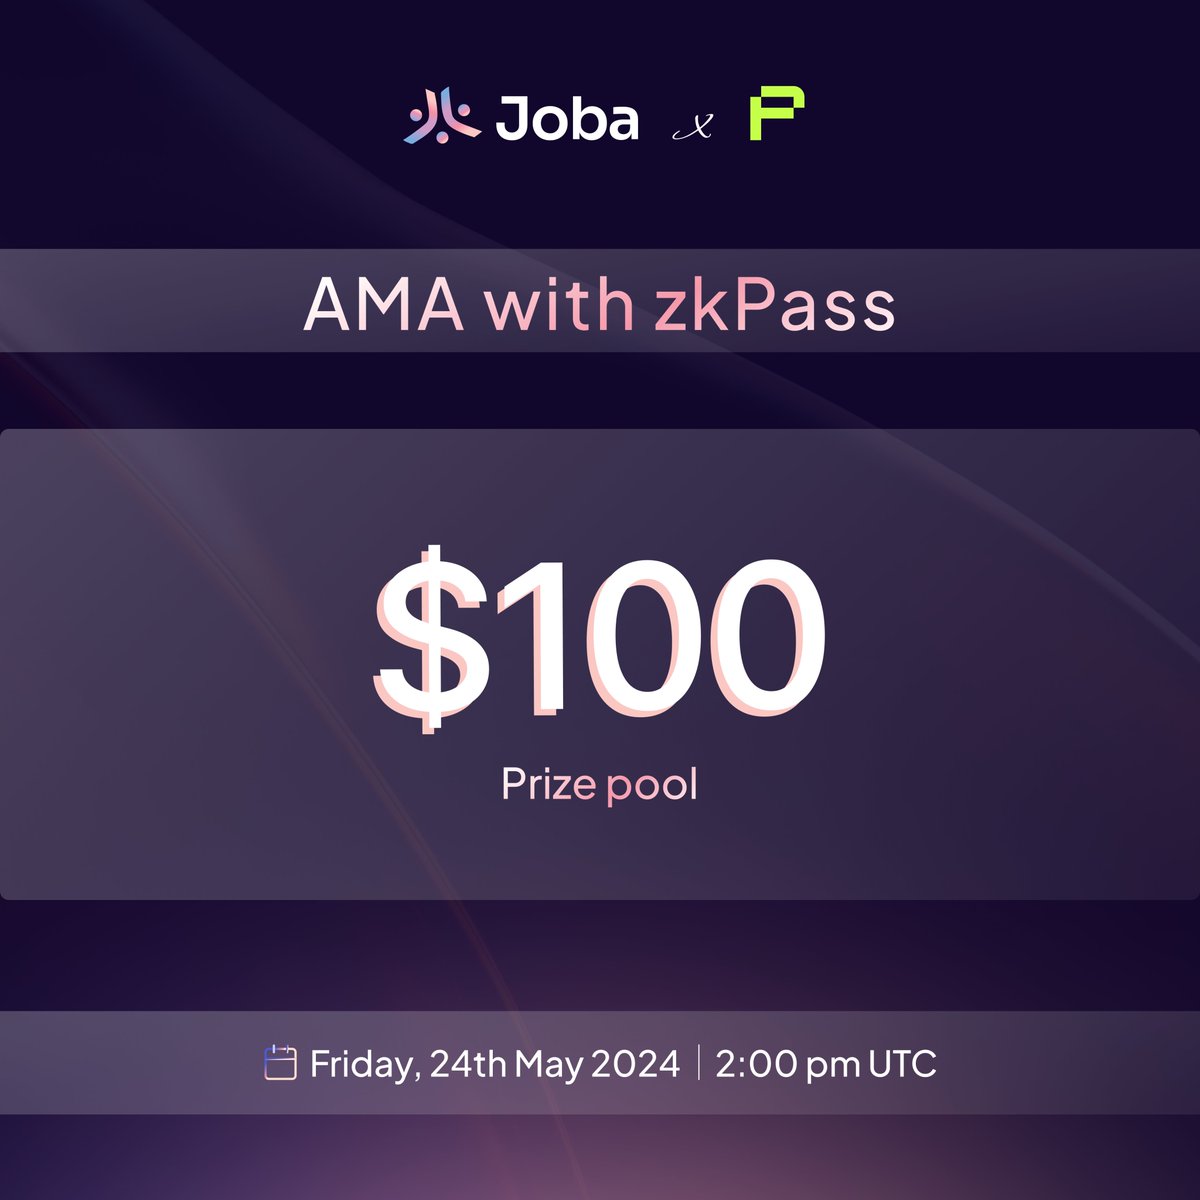 Join our #AMA Session with zkPass! 🚀

📅Friday, 24th May at 2:00 PM UTC
💰Prize pool: $100

In this special AMA-Session, our Ecosystem Lead @errolcart will be going live with @thefranceway from ZkPass to discuss Digital Identity and data protection in Web 3.0

Set reminder: